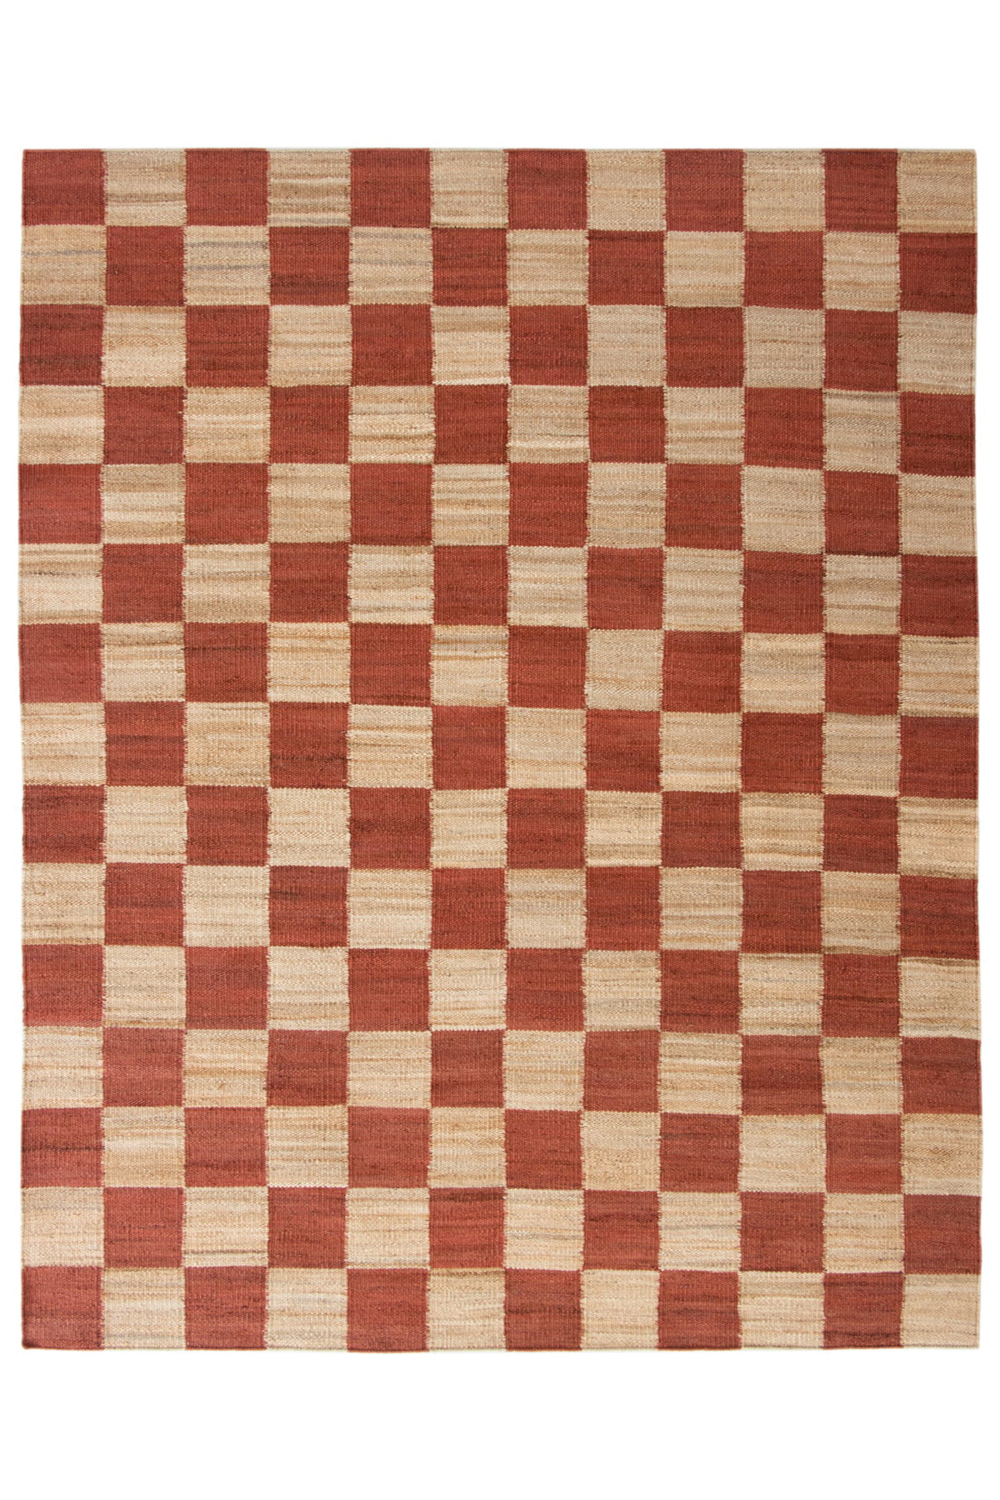 red and white checkered fabric